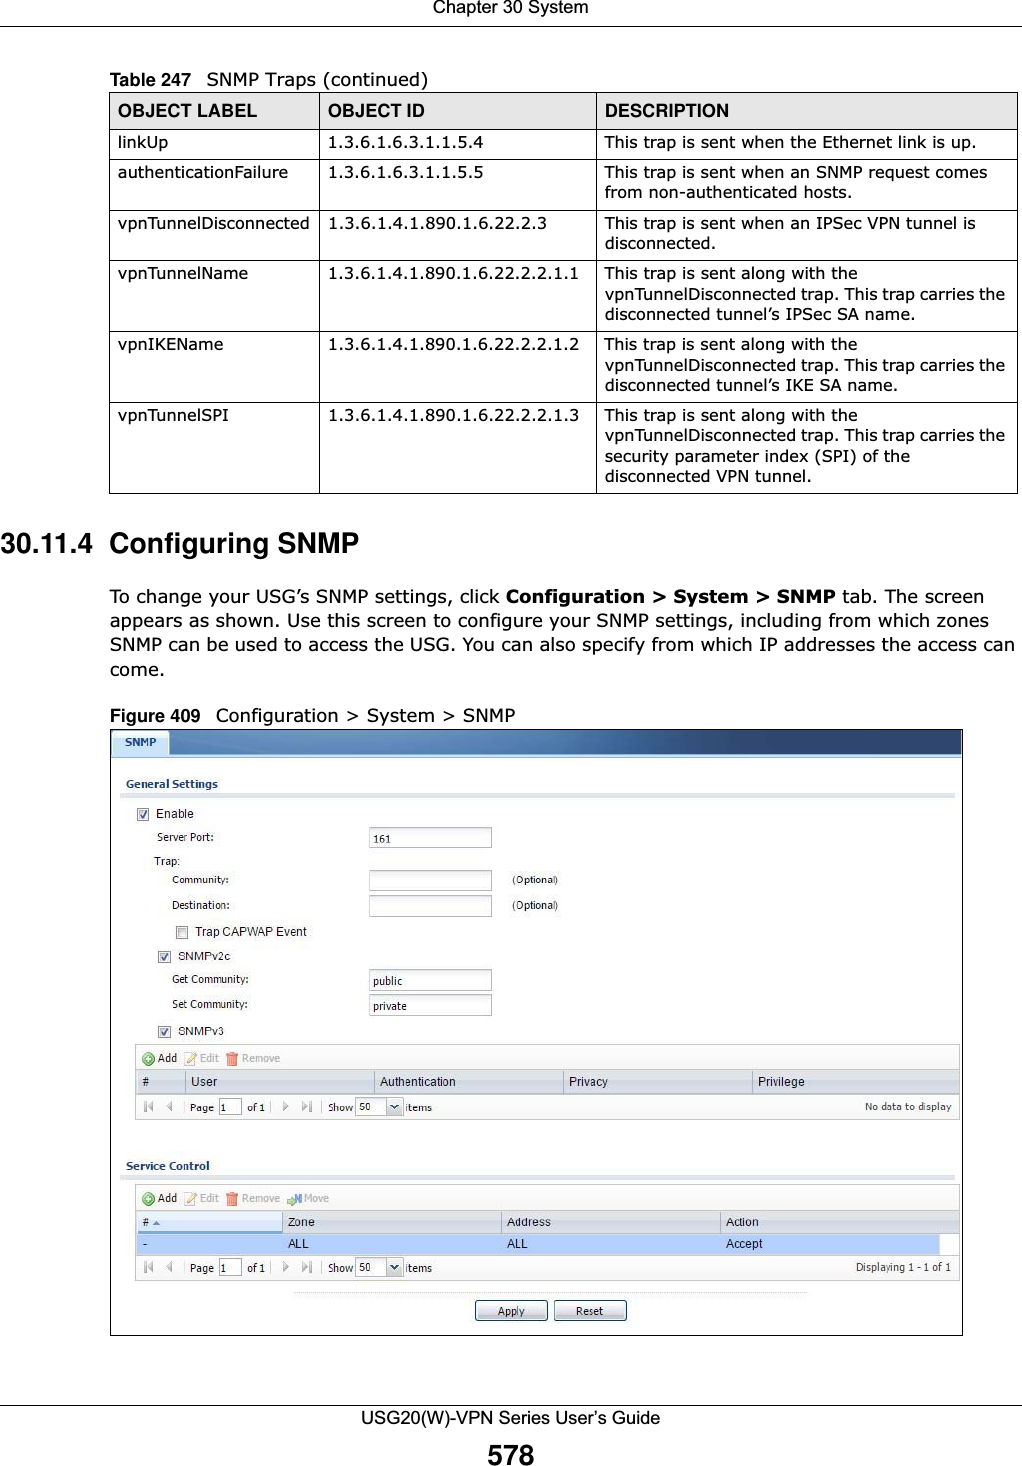 Chapter 30 SystemUSG20(W)-VPN Series User’s Guide57830.11.4  Configuring SNMP To change your USG’s SNMP settings, click Configuration &gt; System &gt; SNMP tab. The screen appears as shown. Use this screen to configure your SNMP settings, including from which zones SNMP can be used to access the USG. You can also specify from which IP addresses the access can come.Figure 409   Configuration &gt; System &gt; SNMPlinkUp 1.3.6.1.6.3.1.1.5.4 This trap is sent when the Ethernet link is up.authenticationFailure 1.3.6.1.6.3.1.1.5.5 This trap is sent when an SNMP request comes from non-authenticated hosts.vpnTunnelDisconnected 1.3.6.1.4.1.890.1.6.22.2.3 This trap is sent when an IPSec VPN tunnel is disconnected.vpnTunnelName 1.3.6.1.4.1.890.1.6.22.2.2.1.1 This trap is sent along with the vpnTunnelDisconnected trap. This trap carries the disconnected tunnel’s IPSec SA name.vpnIKEName 1.3.6.1.4.1.890.1.6.22.2.2.1.2 This trap is sent along with the vpnTunnelDisconnected trap. This trap carries the disconnected tunnel’s IKE SA name.vpnTunnelSPI 1.3.6.1.4.1.890.1.6.22.2.2.1.3 This trap is sent along with the vpnTunnelDisconnected trap. This trap carries the security parameter index (SPI) of the disconnected VPN tunnel.Table 247   SNMP Traps (continued)OBJECT LABEL OBJECT ID DESCRIPTION